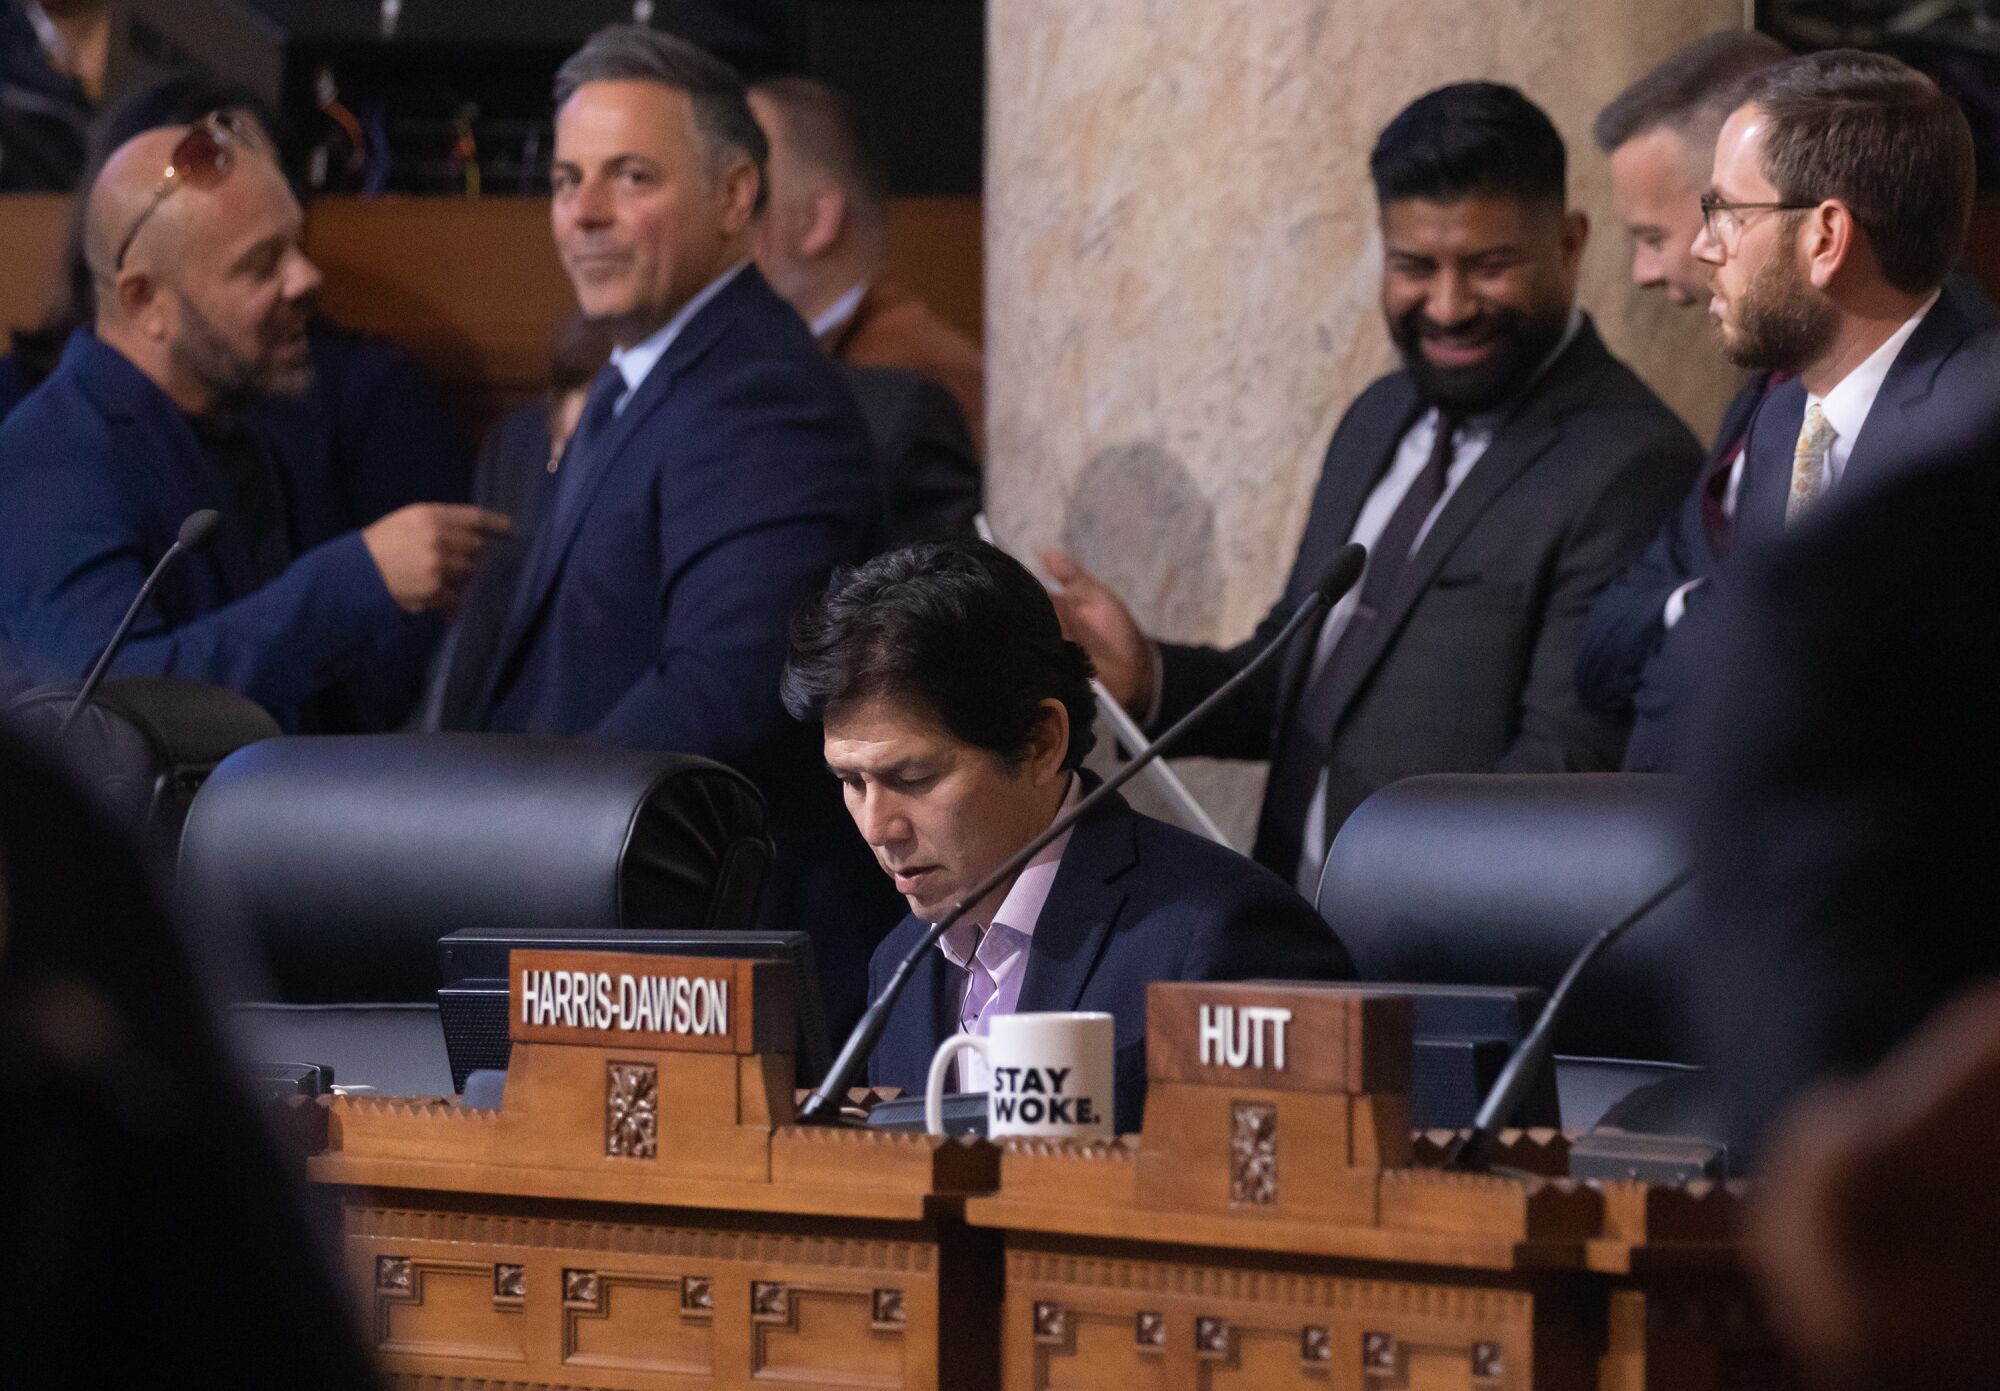 Los Angeles City Council Member Kevin de León sits while other people talk and move behind him.